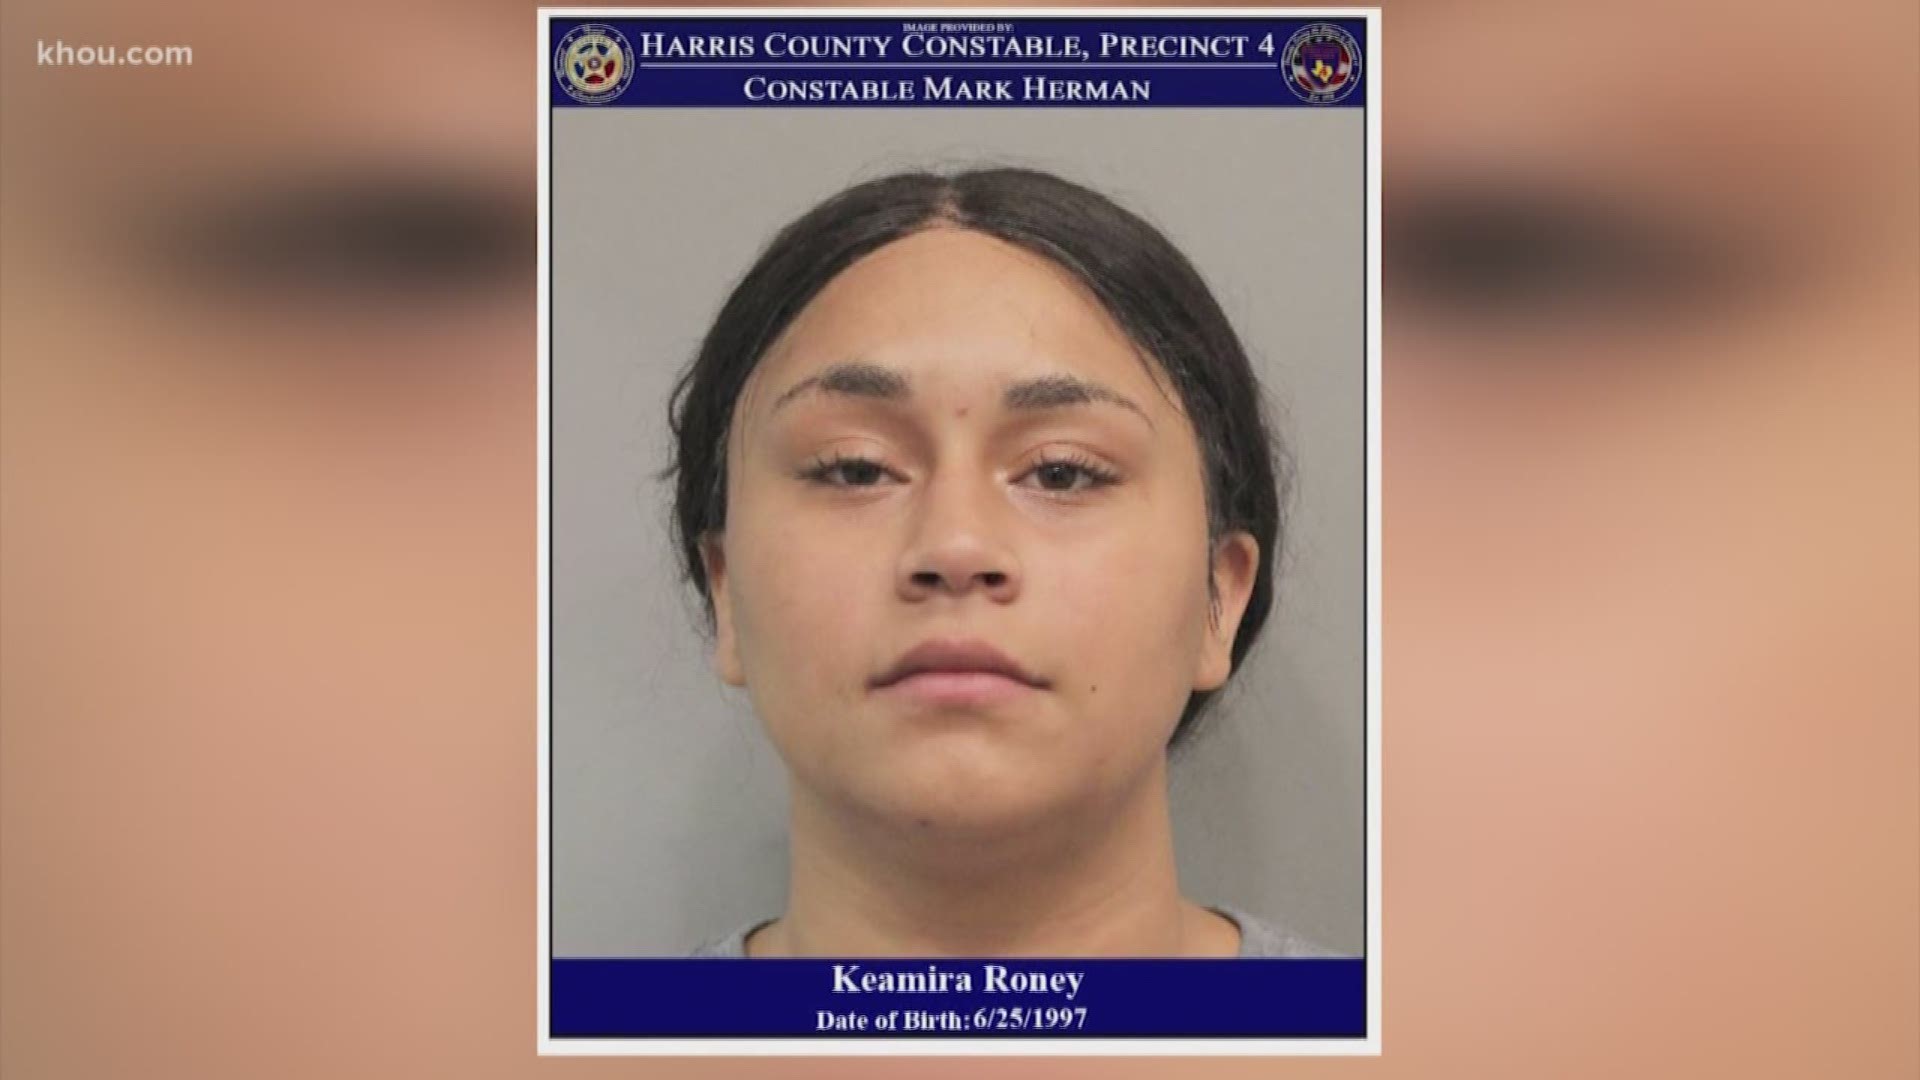 Keamira Roney has been charged with endangering a child after deputies said she left her four kids alone in an apartment for more than 8 hours.